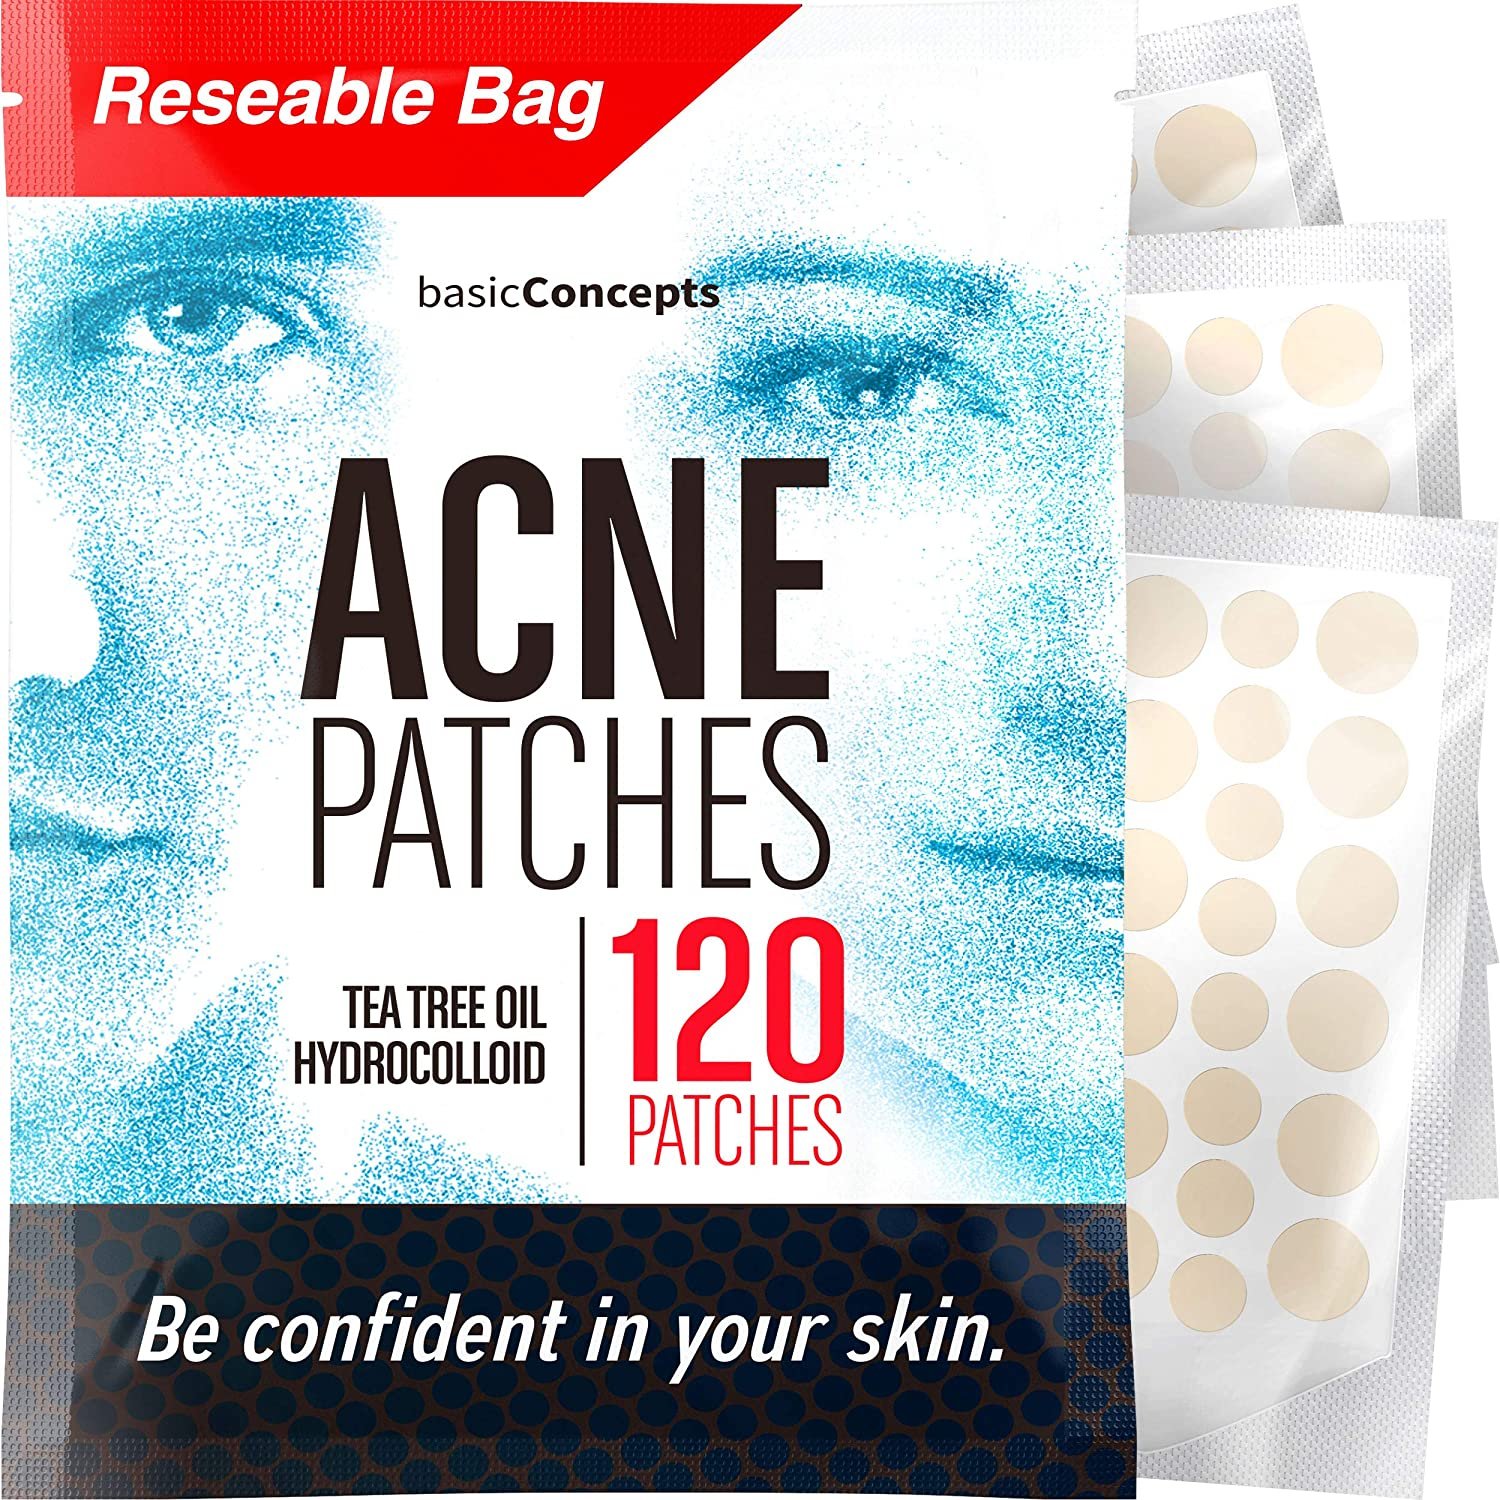 Basic Concepts Acne Patches (120 Pack)